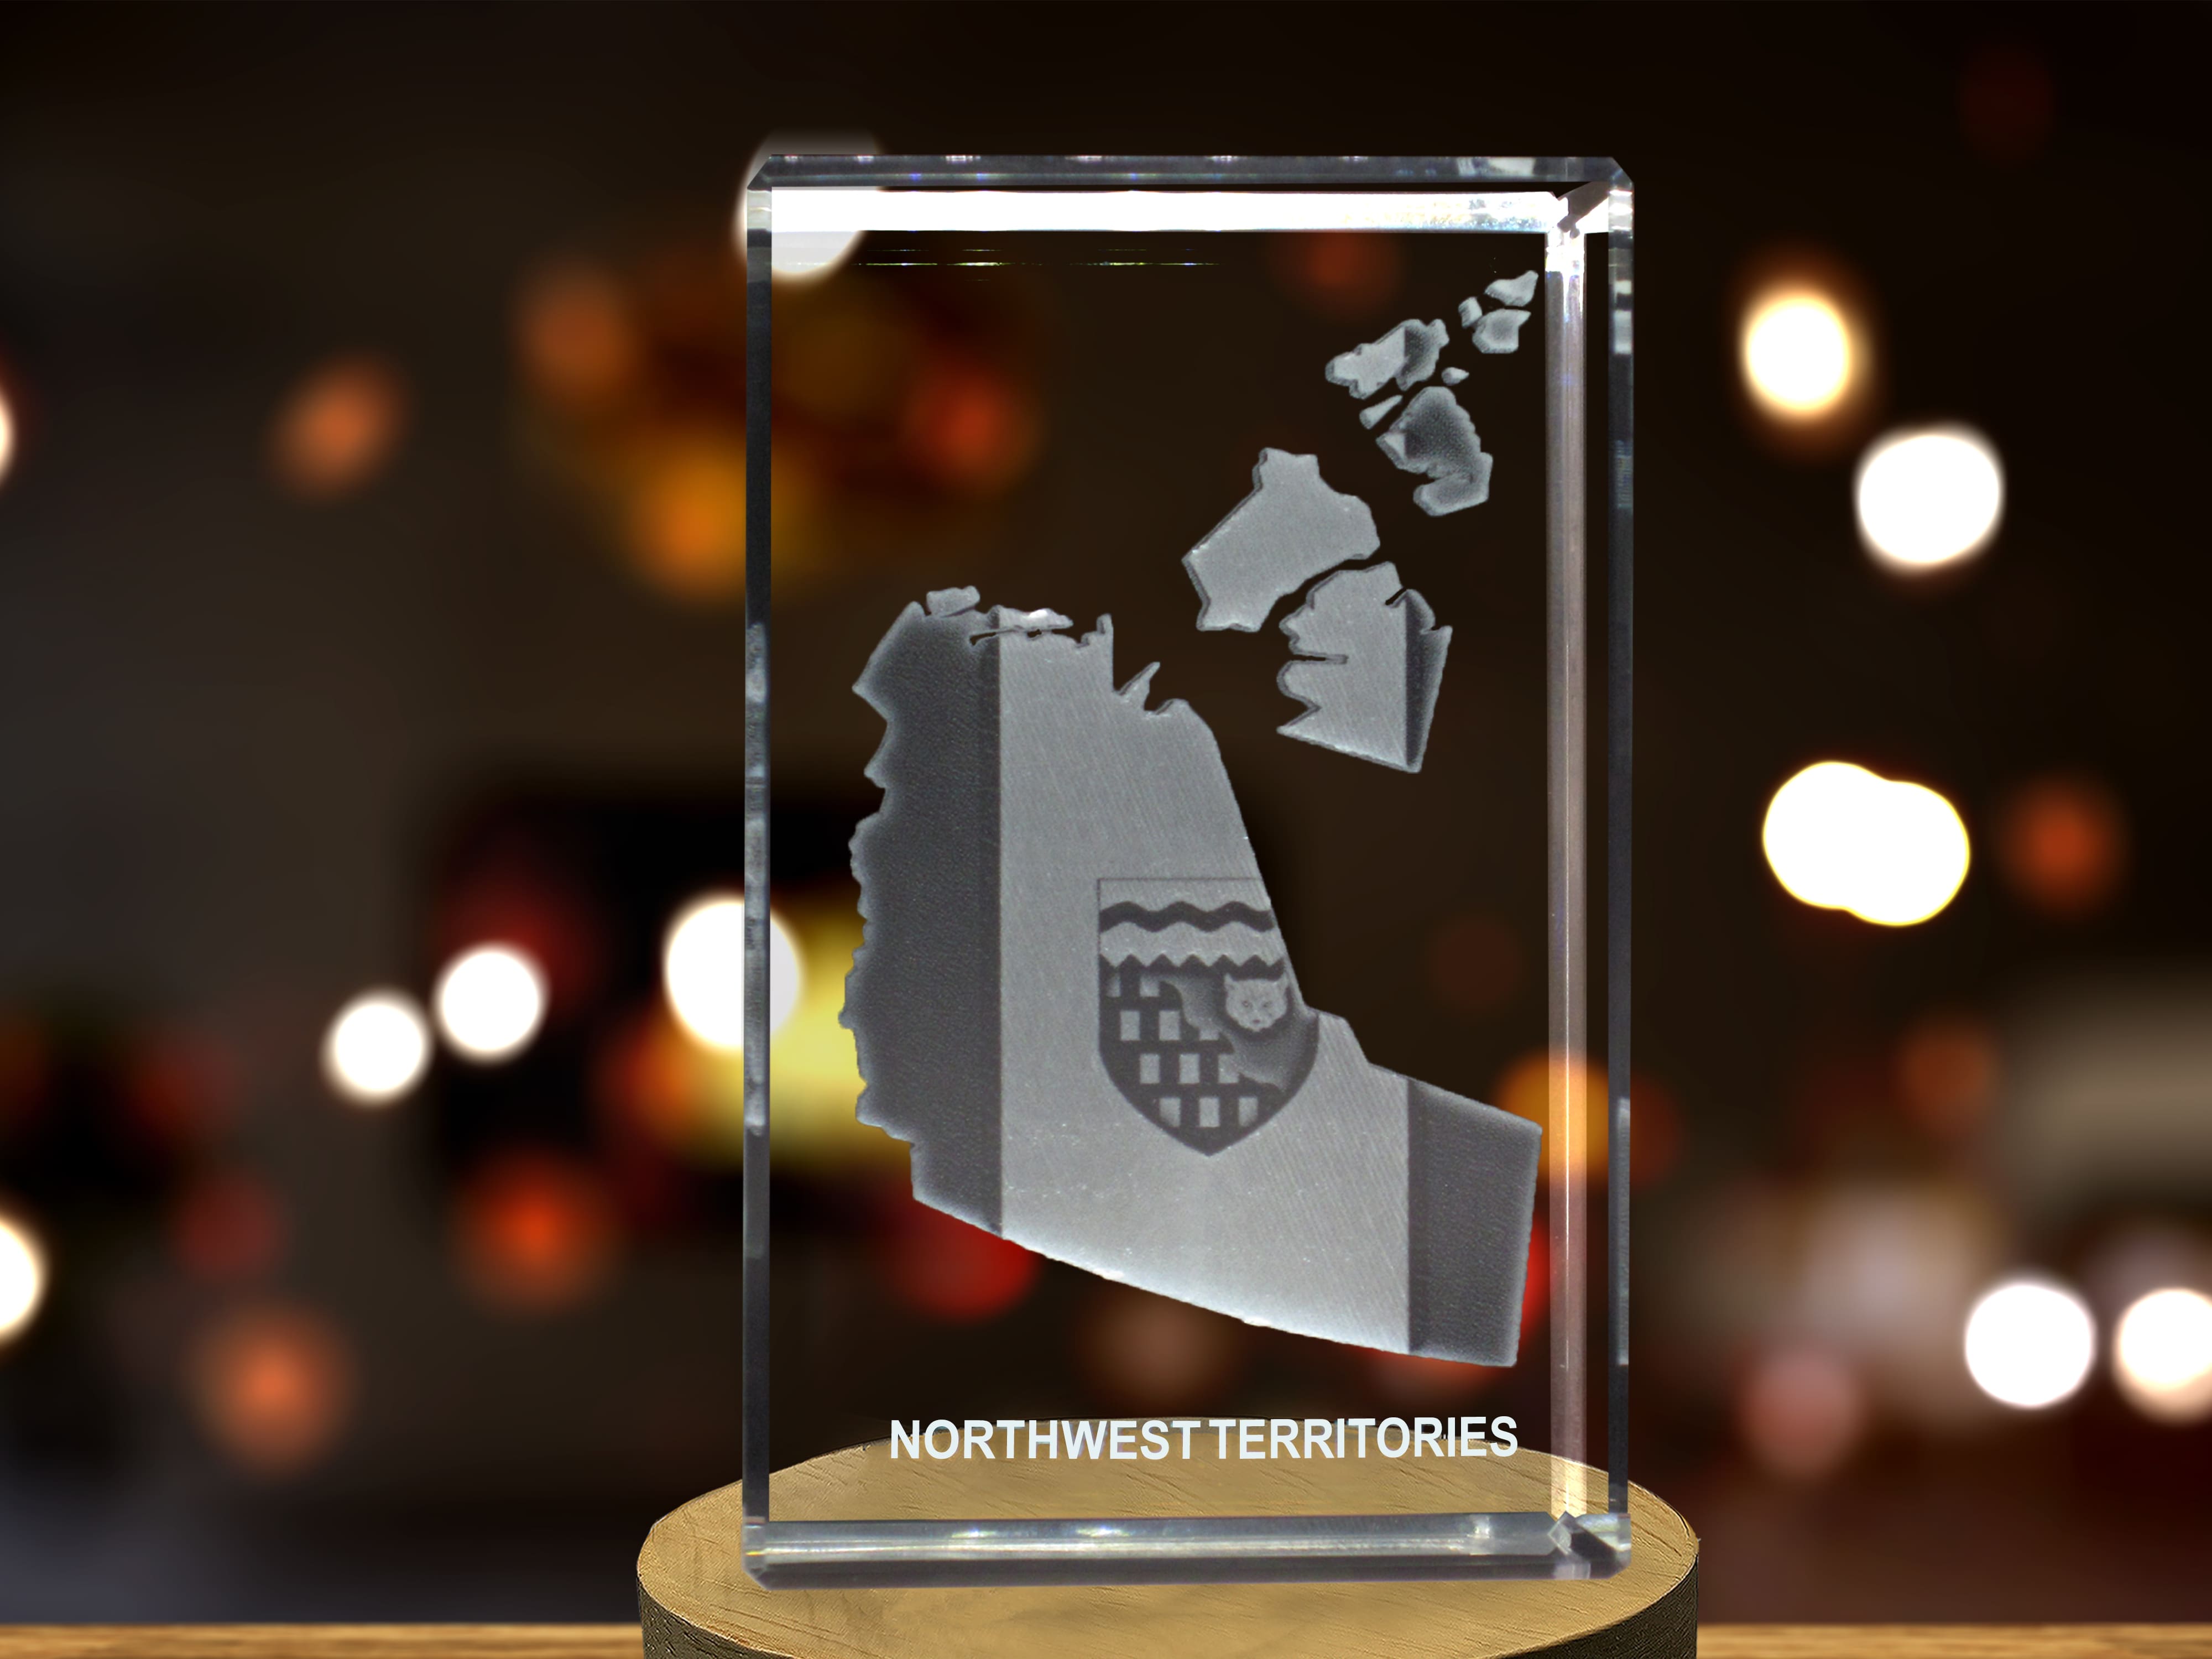 Northwest Territories 3D Engraved Crystal 3D Engraved Crystal Keepsake/Gift/Decor/Collectible/Souvenir A&B Crystal Collection